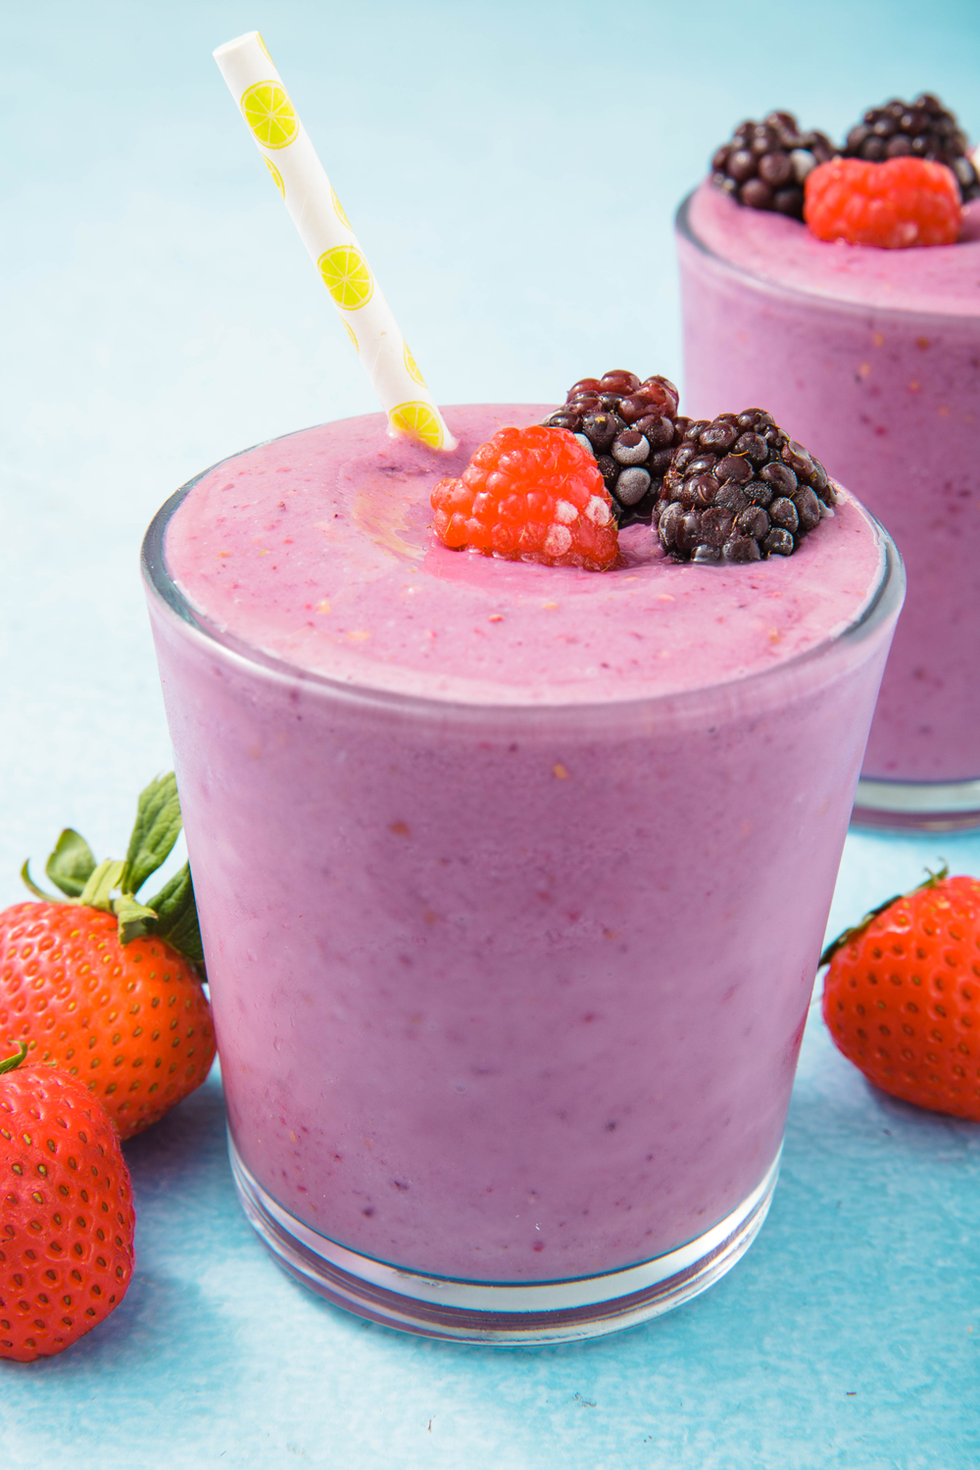 21 Delicious Smoothie Recipes For When You Need A Healthy ...